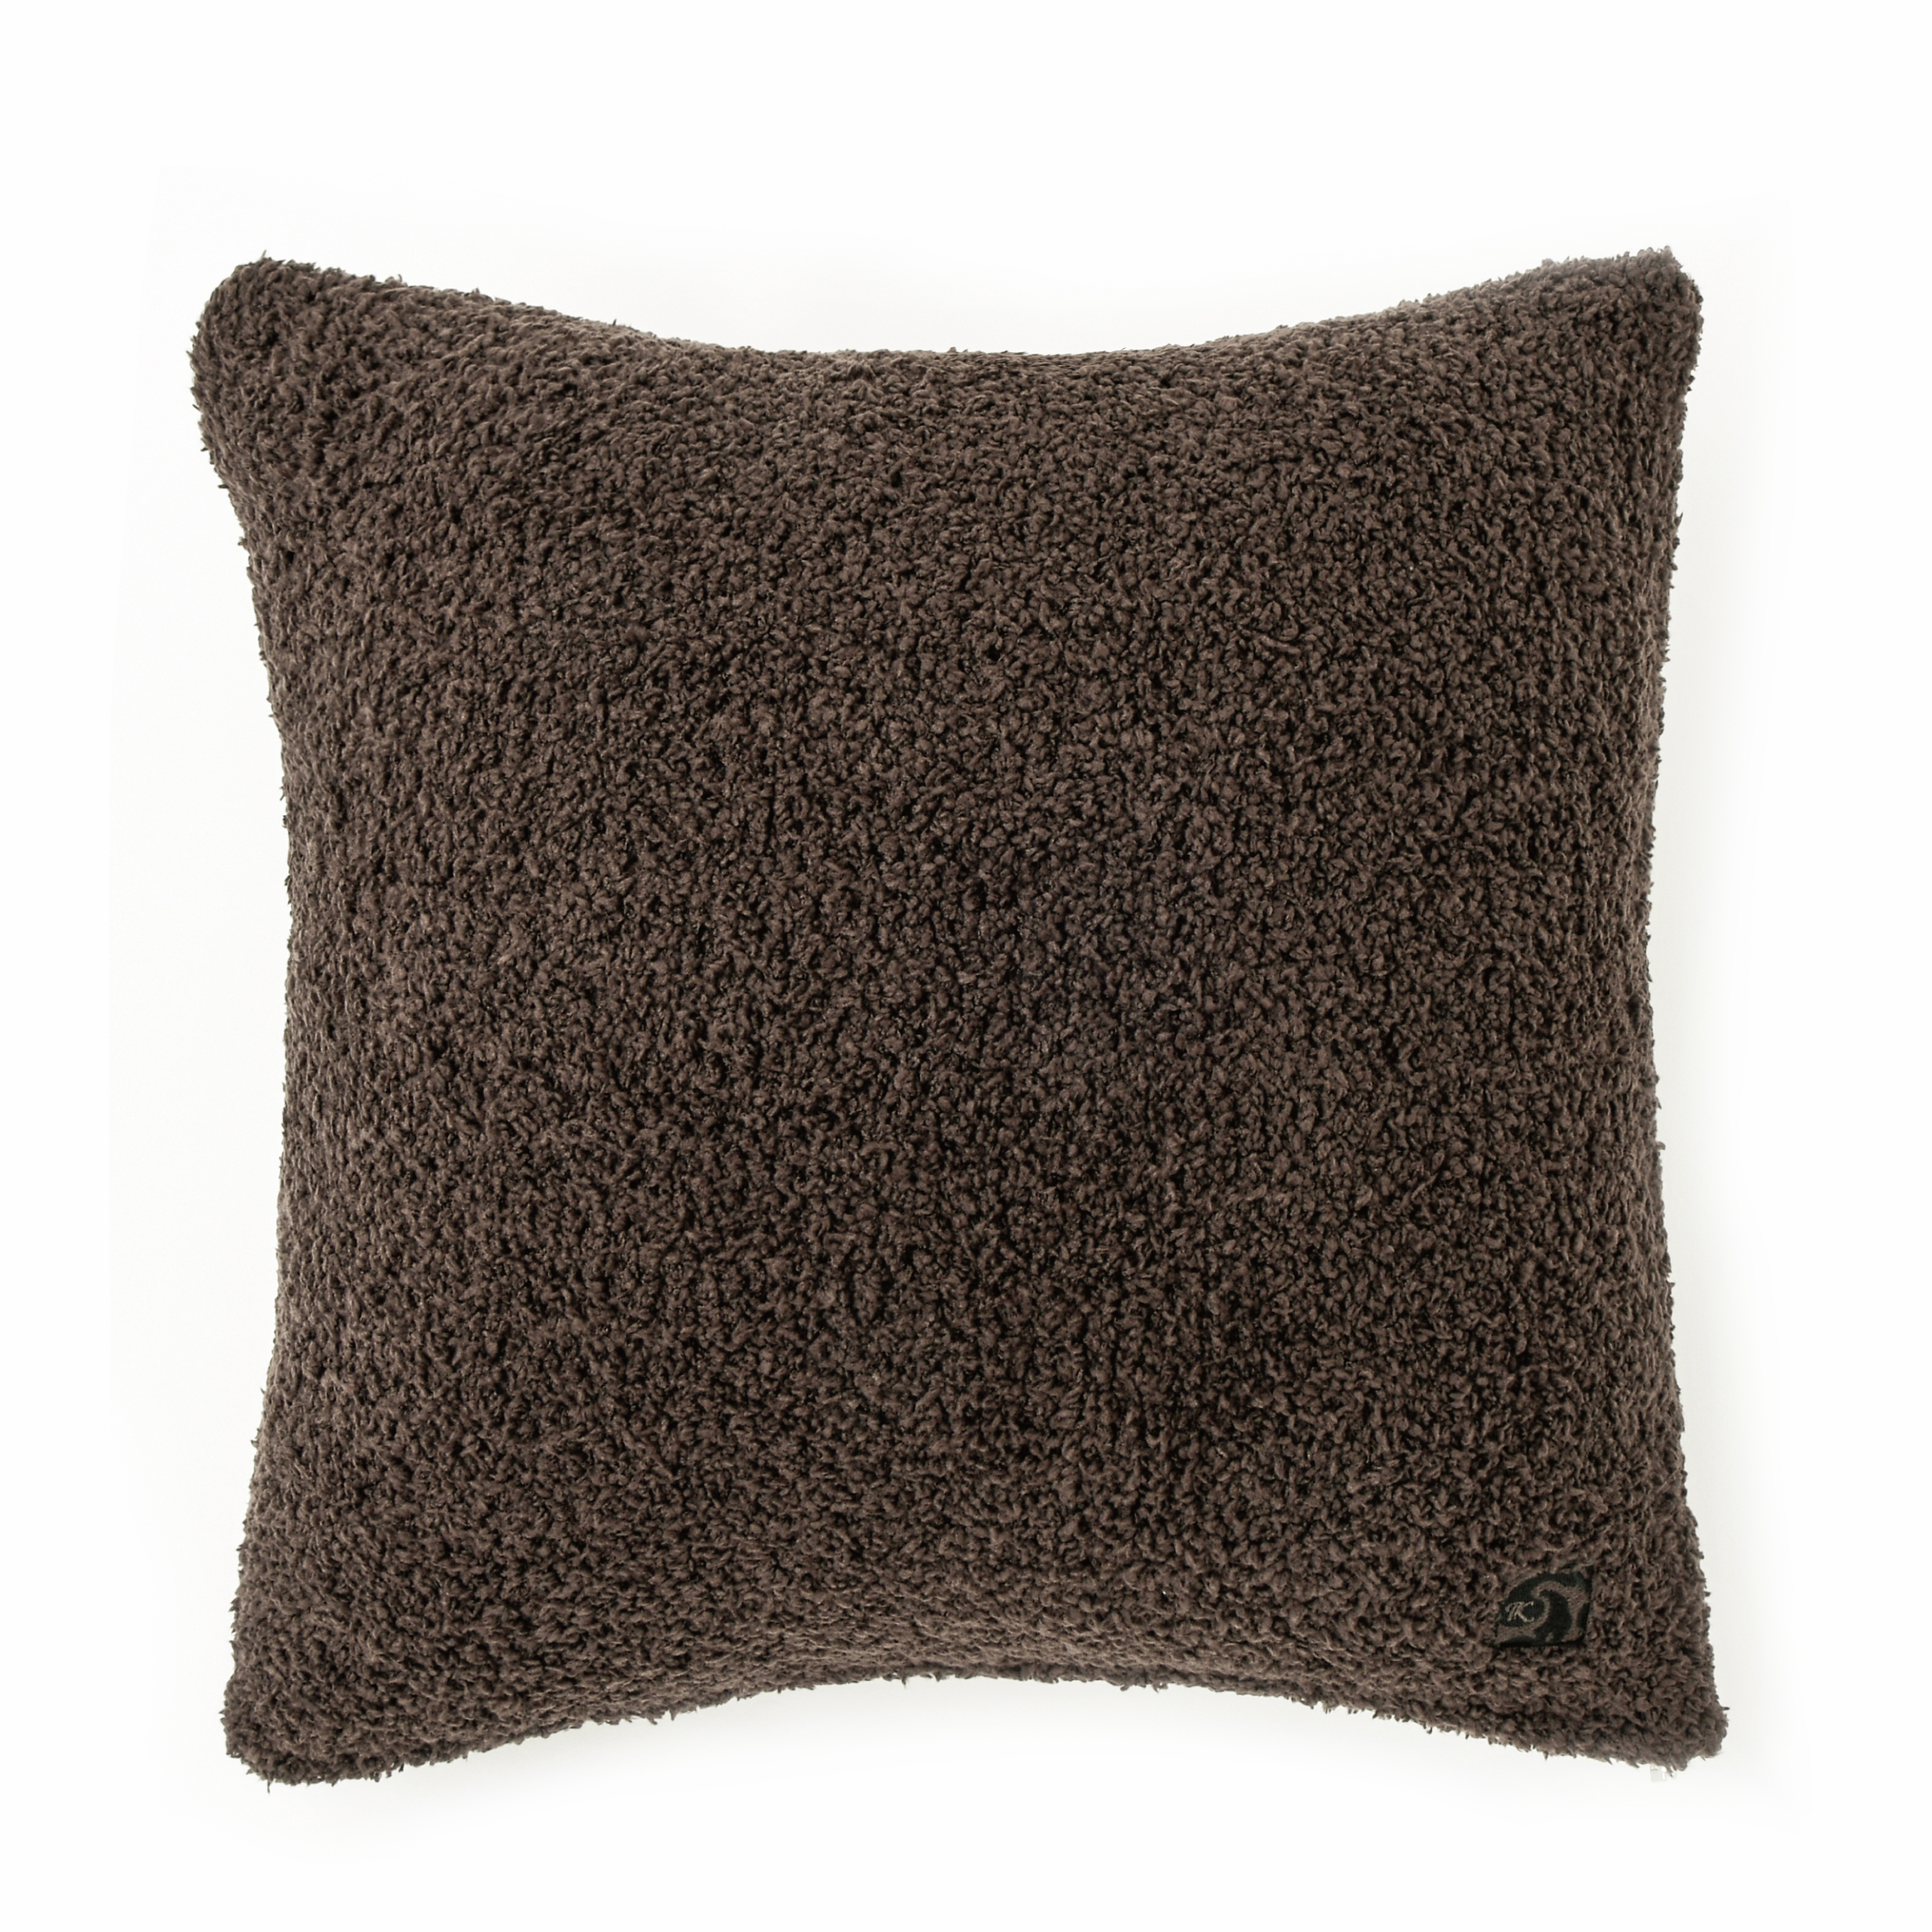 CUSHION COVER / SOLID